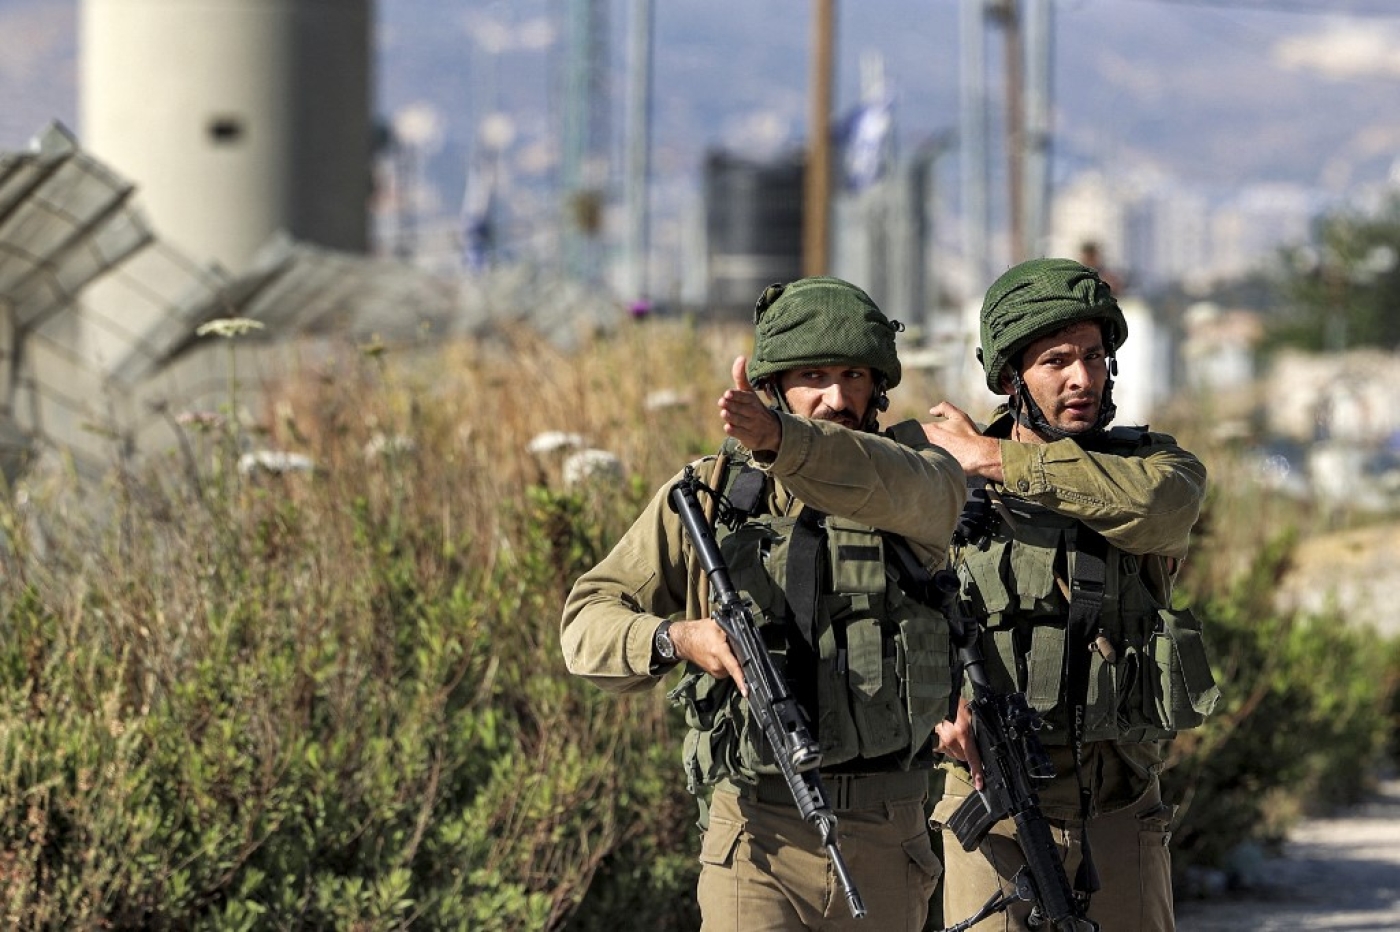 Israeli army soldiers manning the Huwara checkpoint near Nablus in the occupied West Bank on 17 May 2022 (AFP)